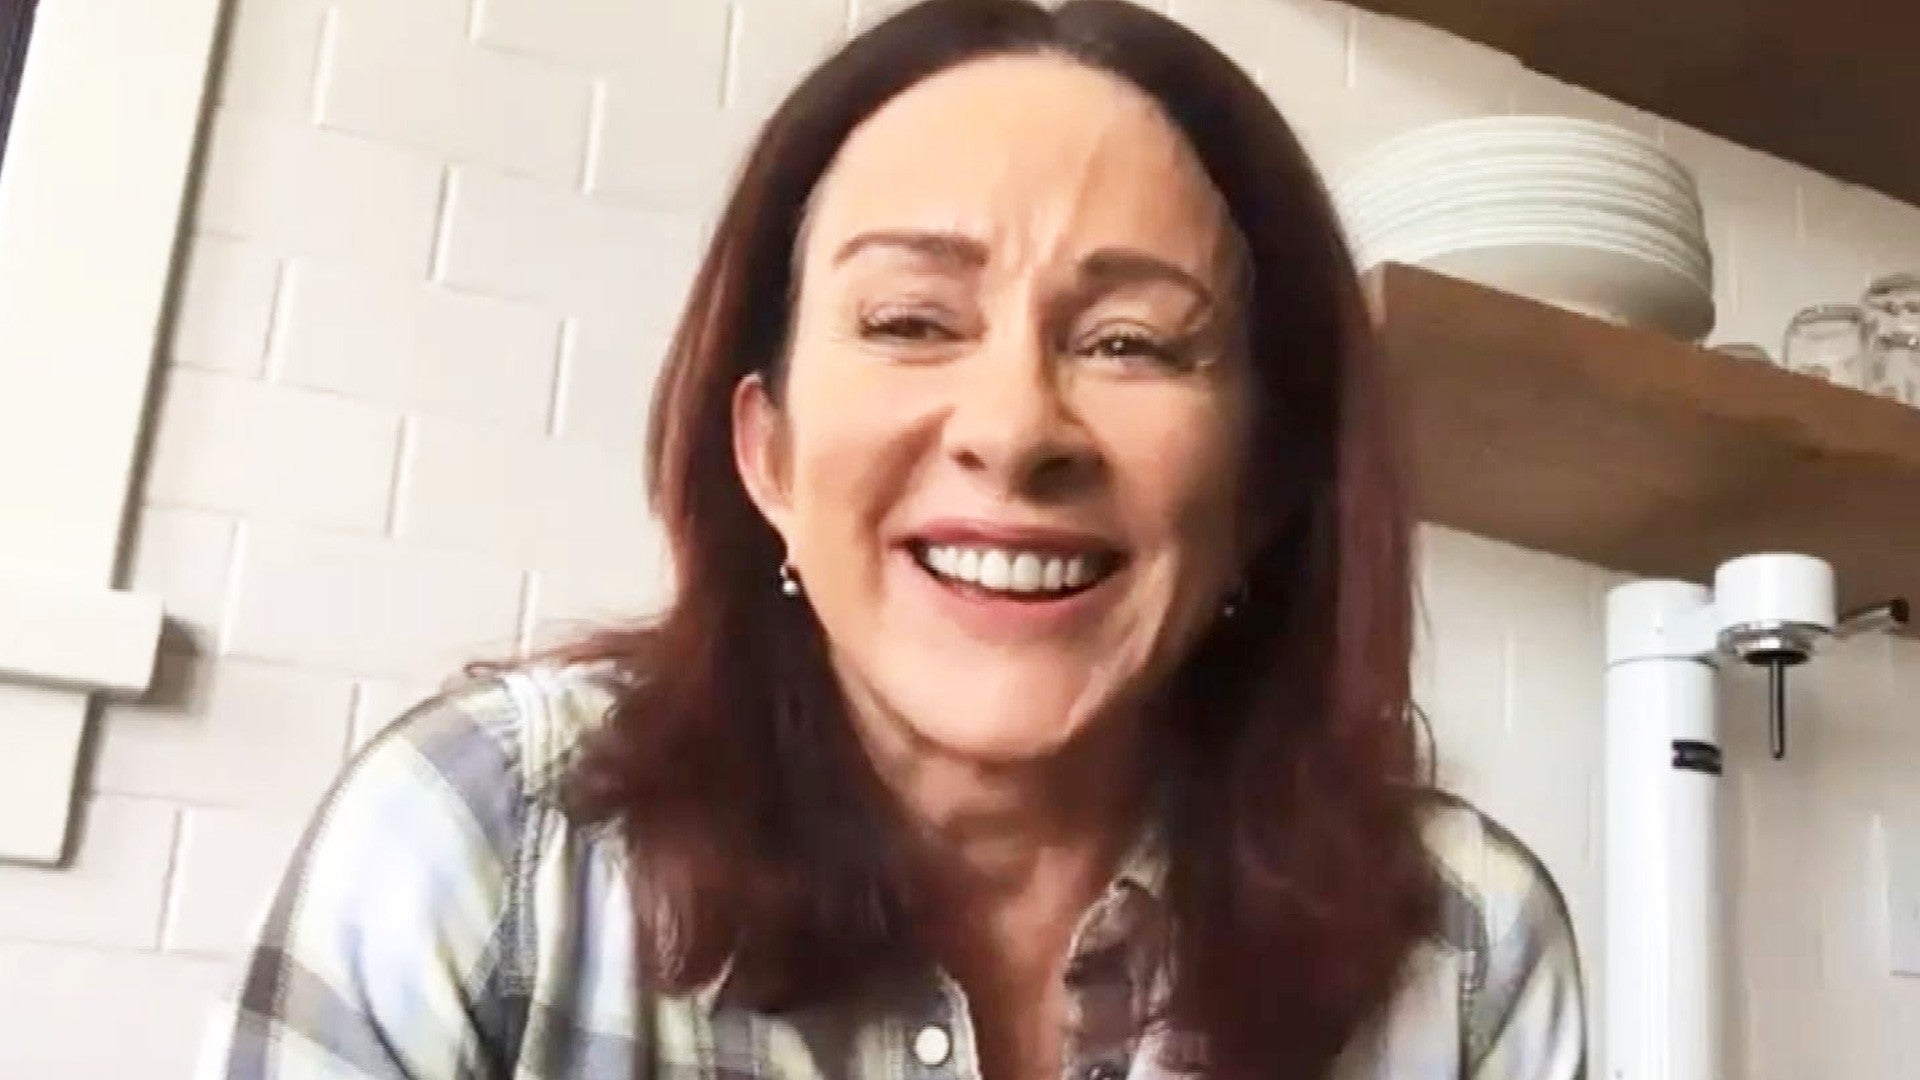 Patricia heaton top best naked photos - Adult videos